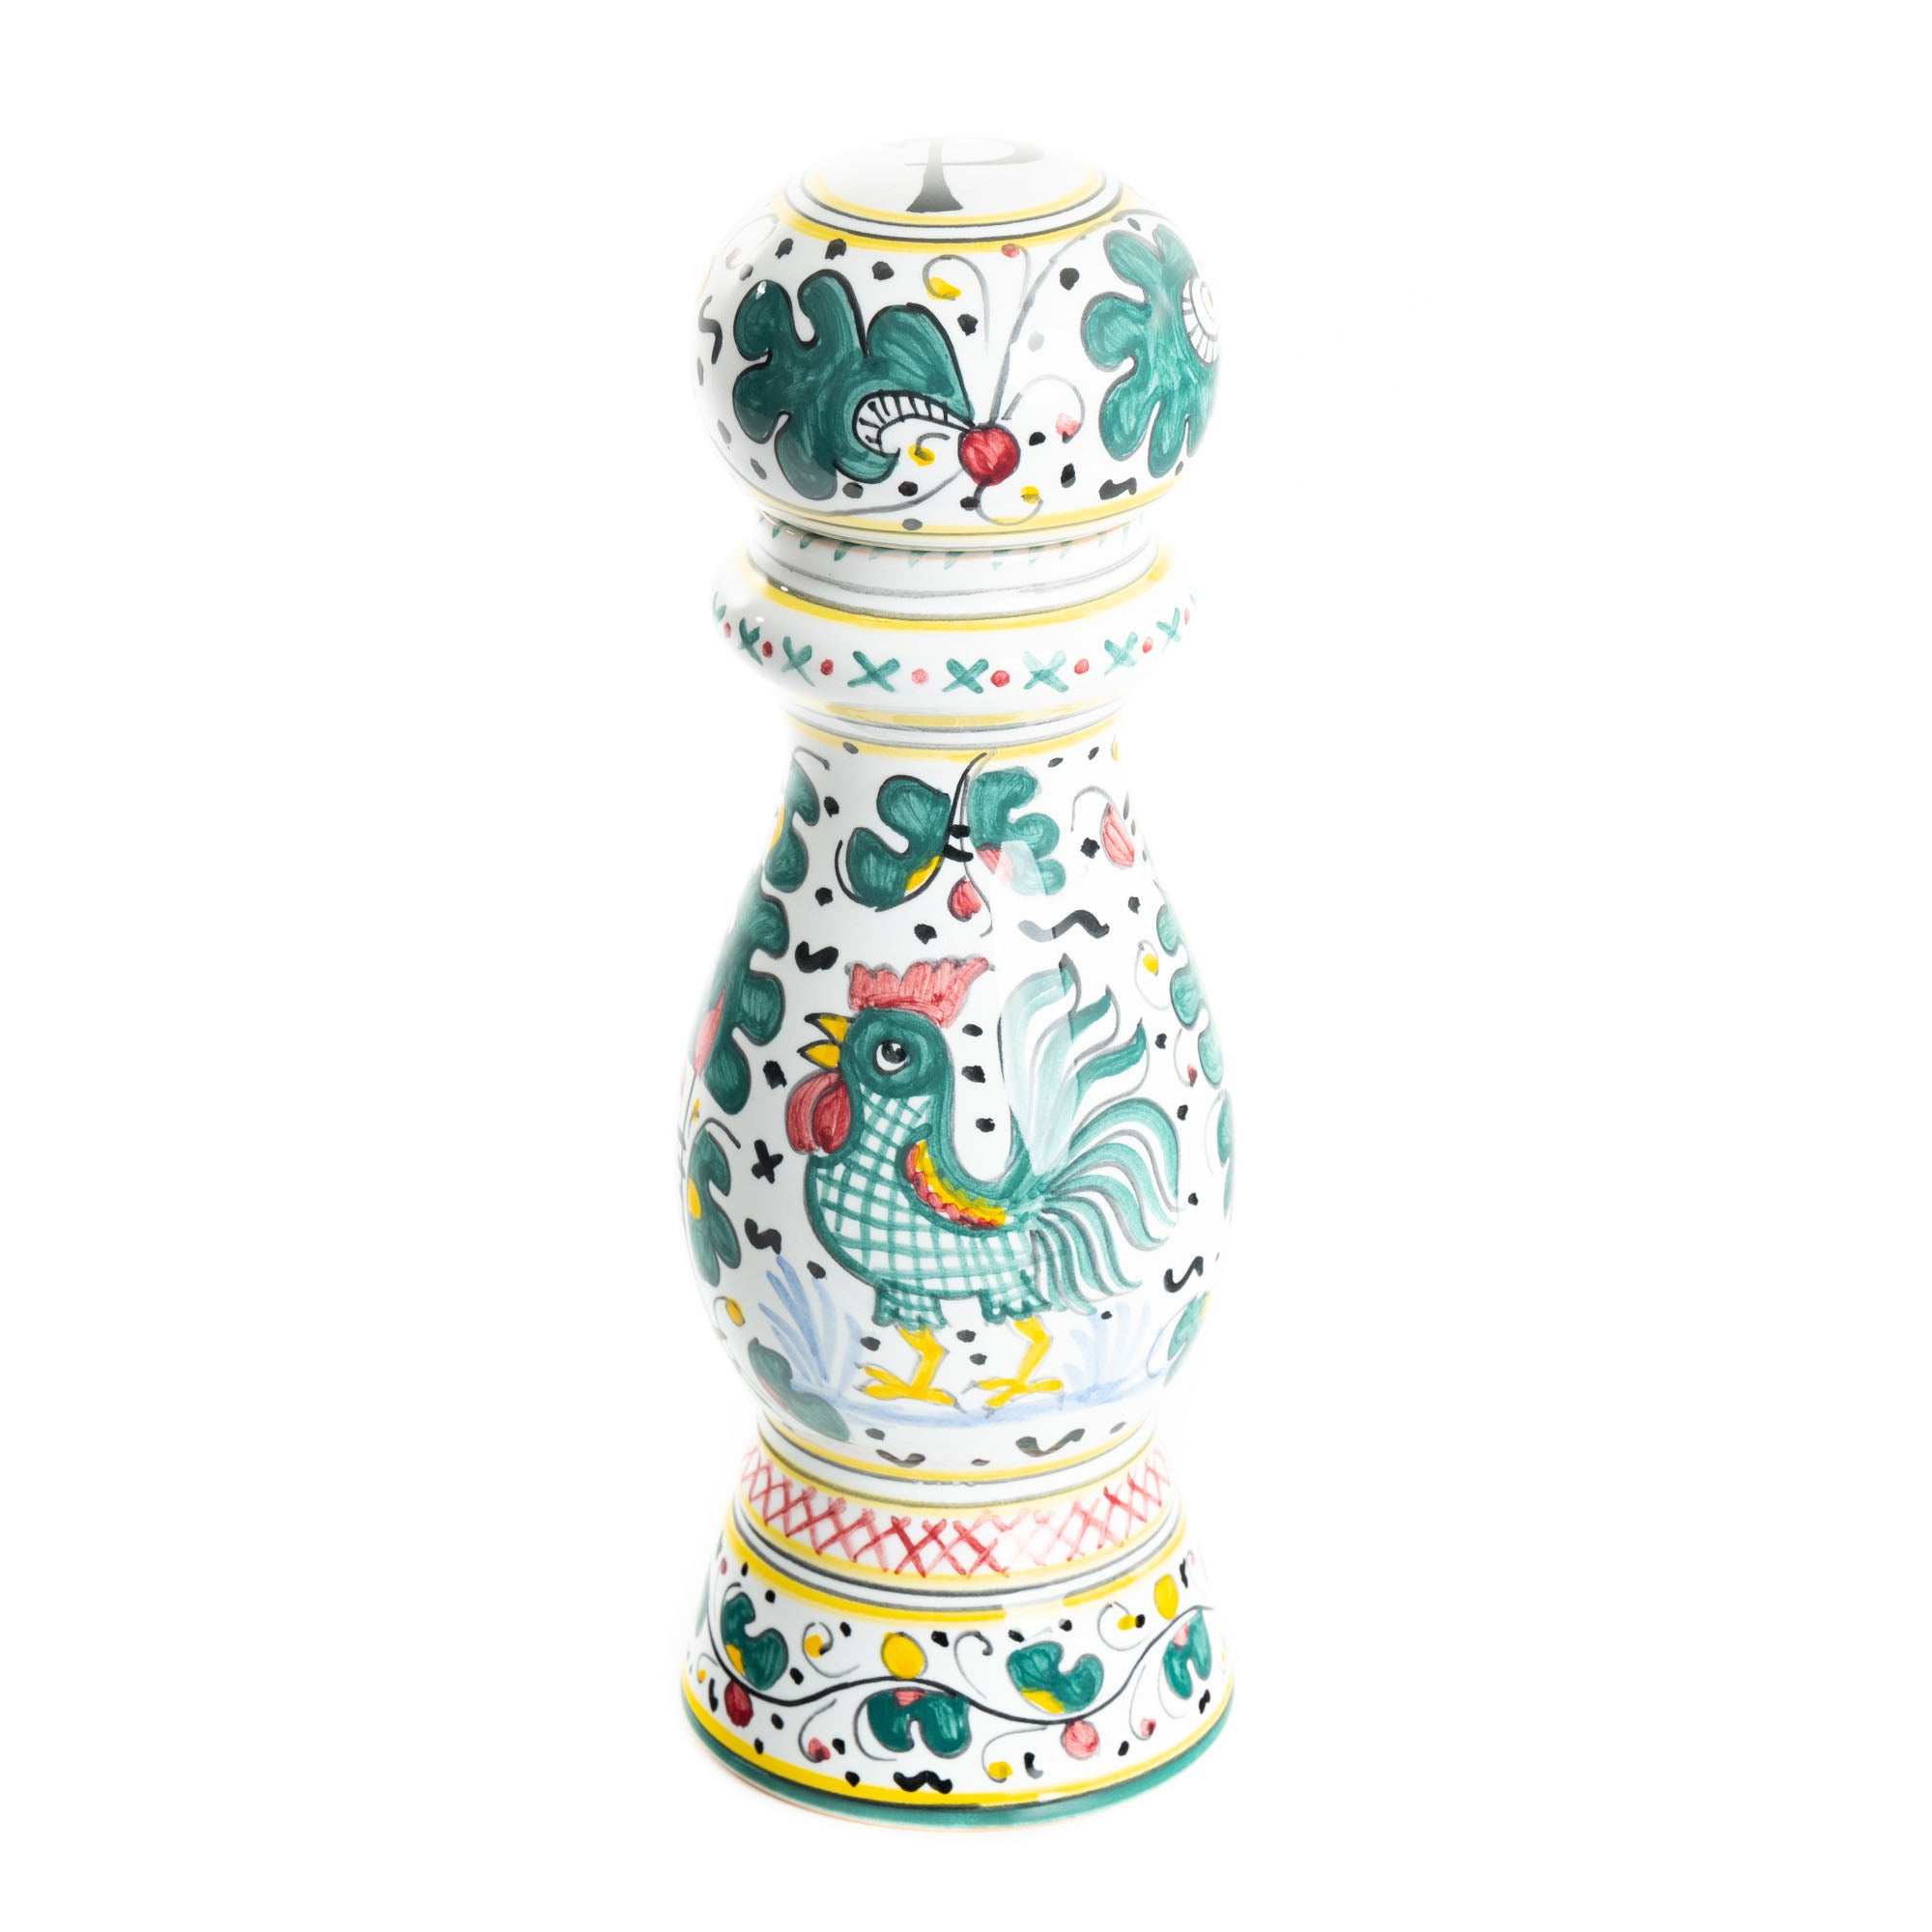 Orvieto - Salt & Pepper Grinder Set, ceramics, pottery, italian design, majolica, handmade, handcrafted, handpainted, home decor, kitchen art, home goods, deruta, majolica, Artisan, treasures, traditional art, modern art, gift ideas, style, SF, shop small business, artists, shop online, landmark store, legacy, one of a kind, limited edition, gift guide, gift shop, retail shop, decorations, shopping, italy, home staging, home decorating, home interiors